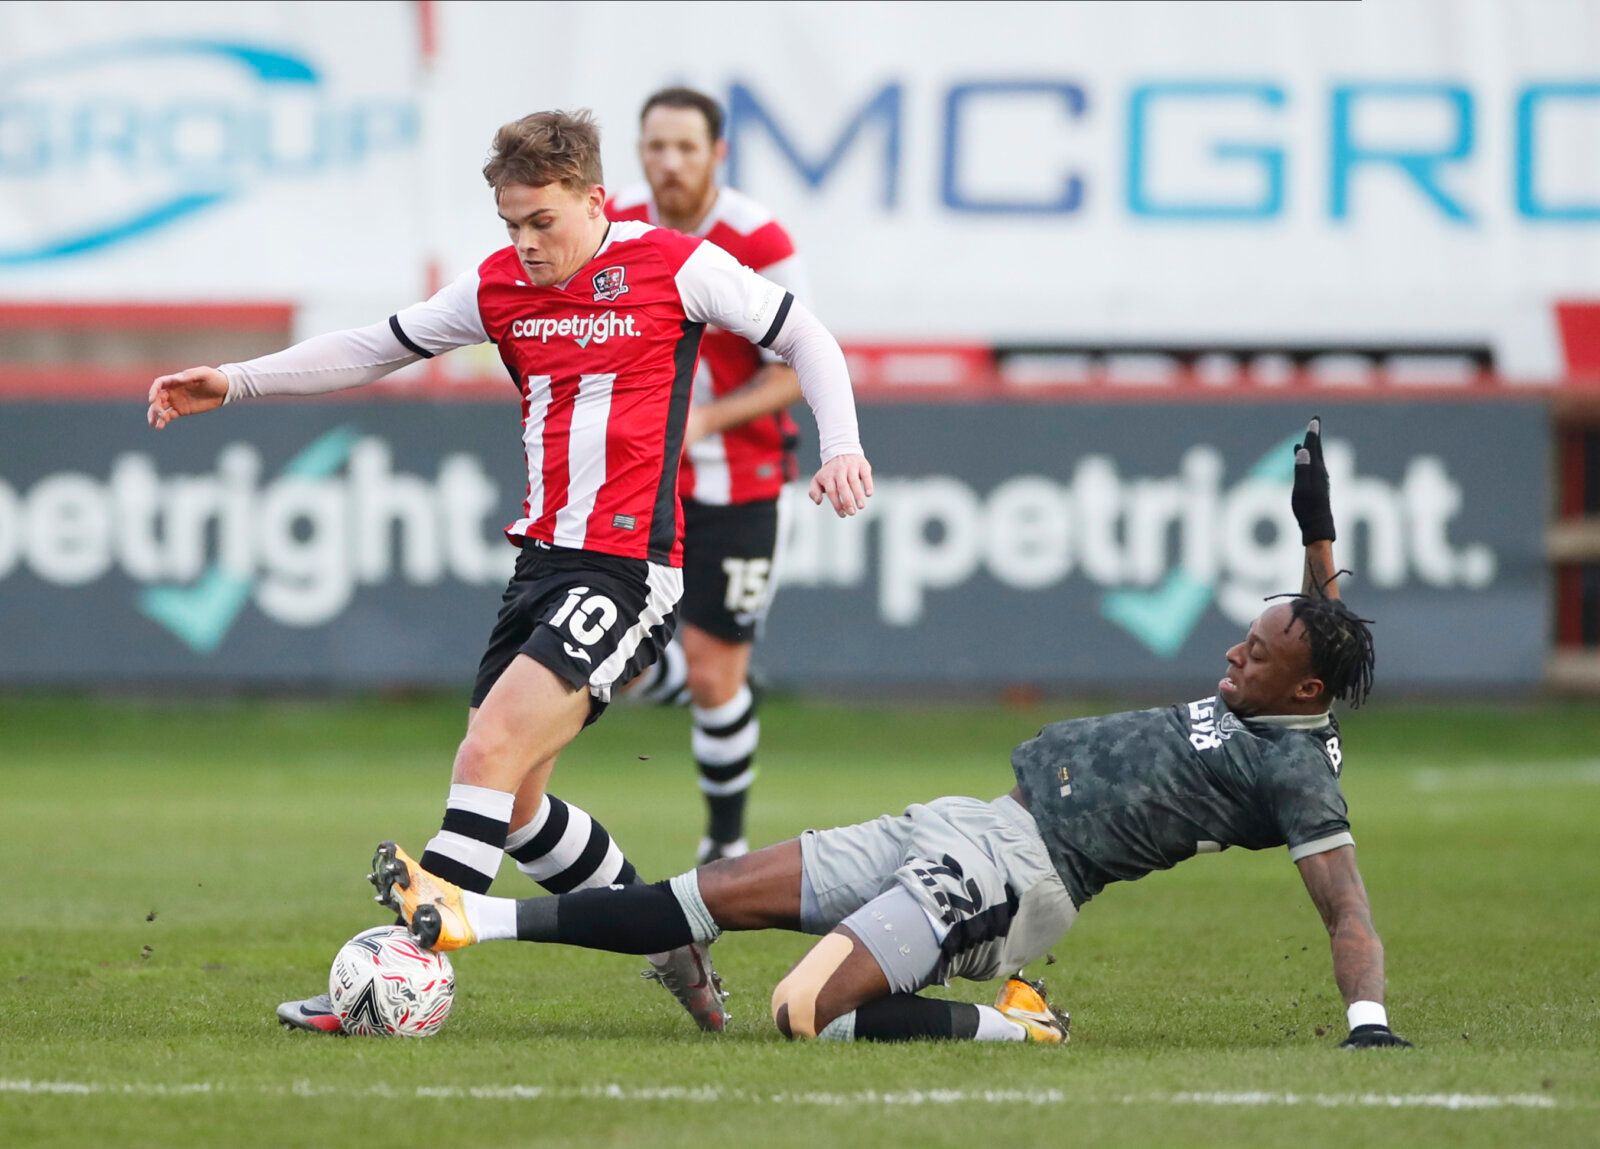 Soccer Football - FA Cup - Third Round - Exeter City v Sheffield Wednesday - St James Park, Exeter, Britain - January 9, 2021  Exeter City's Archie Collins in action with Sheffield Wednesday's Moses Odubajo Action Images via Reuters/Paul Childs